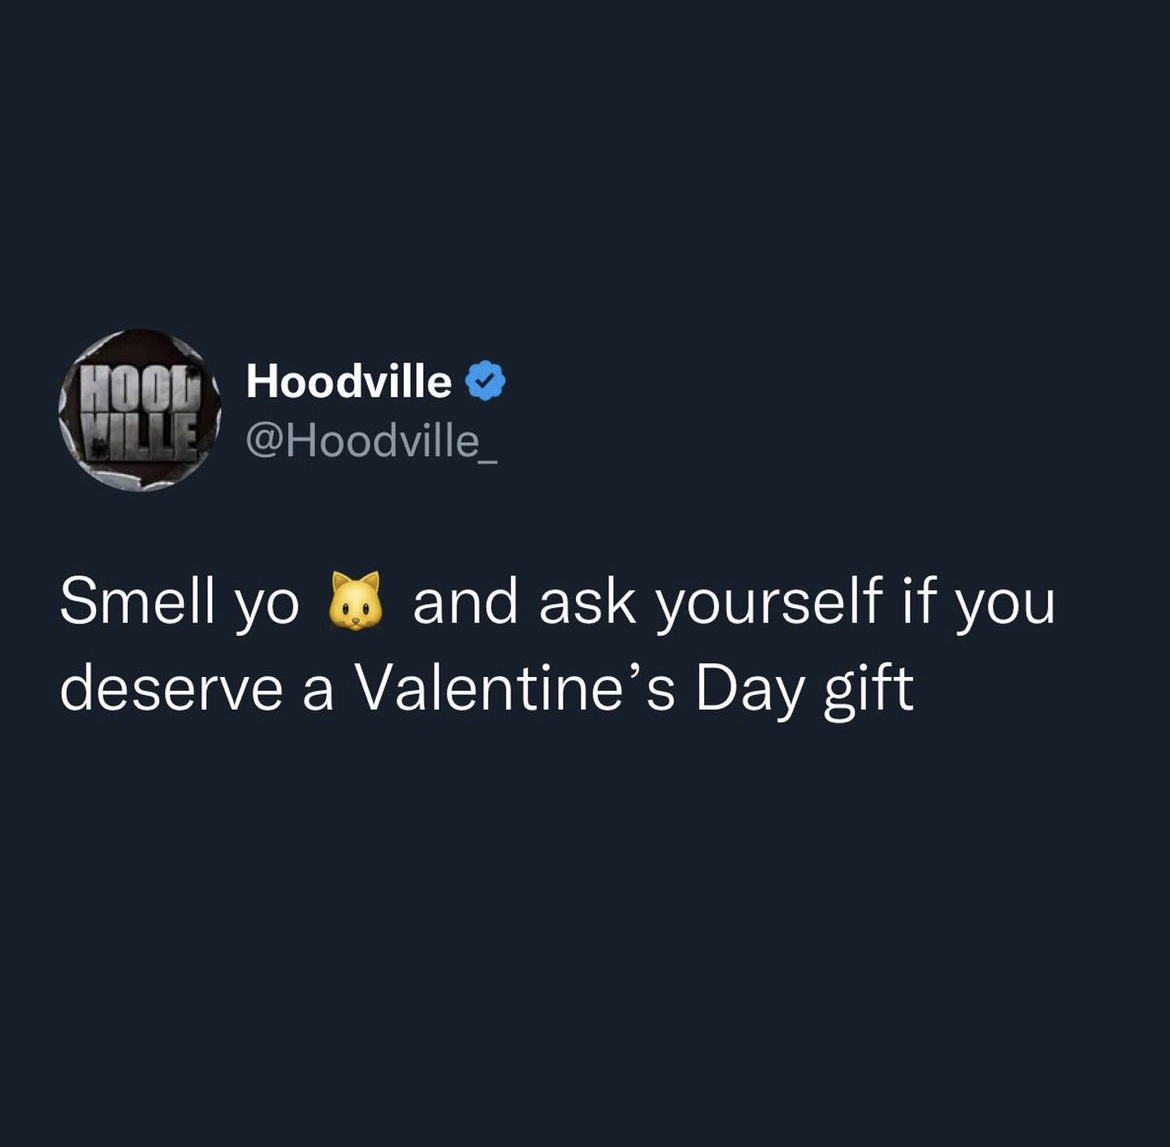 Hoodville memes and captions - computer wallpaper - Hool Hoodville Le Smell yo and ask yourself if you deserve a Valentine's Day gift